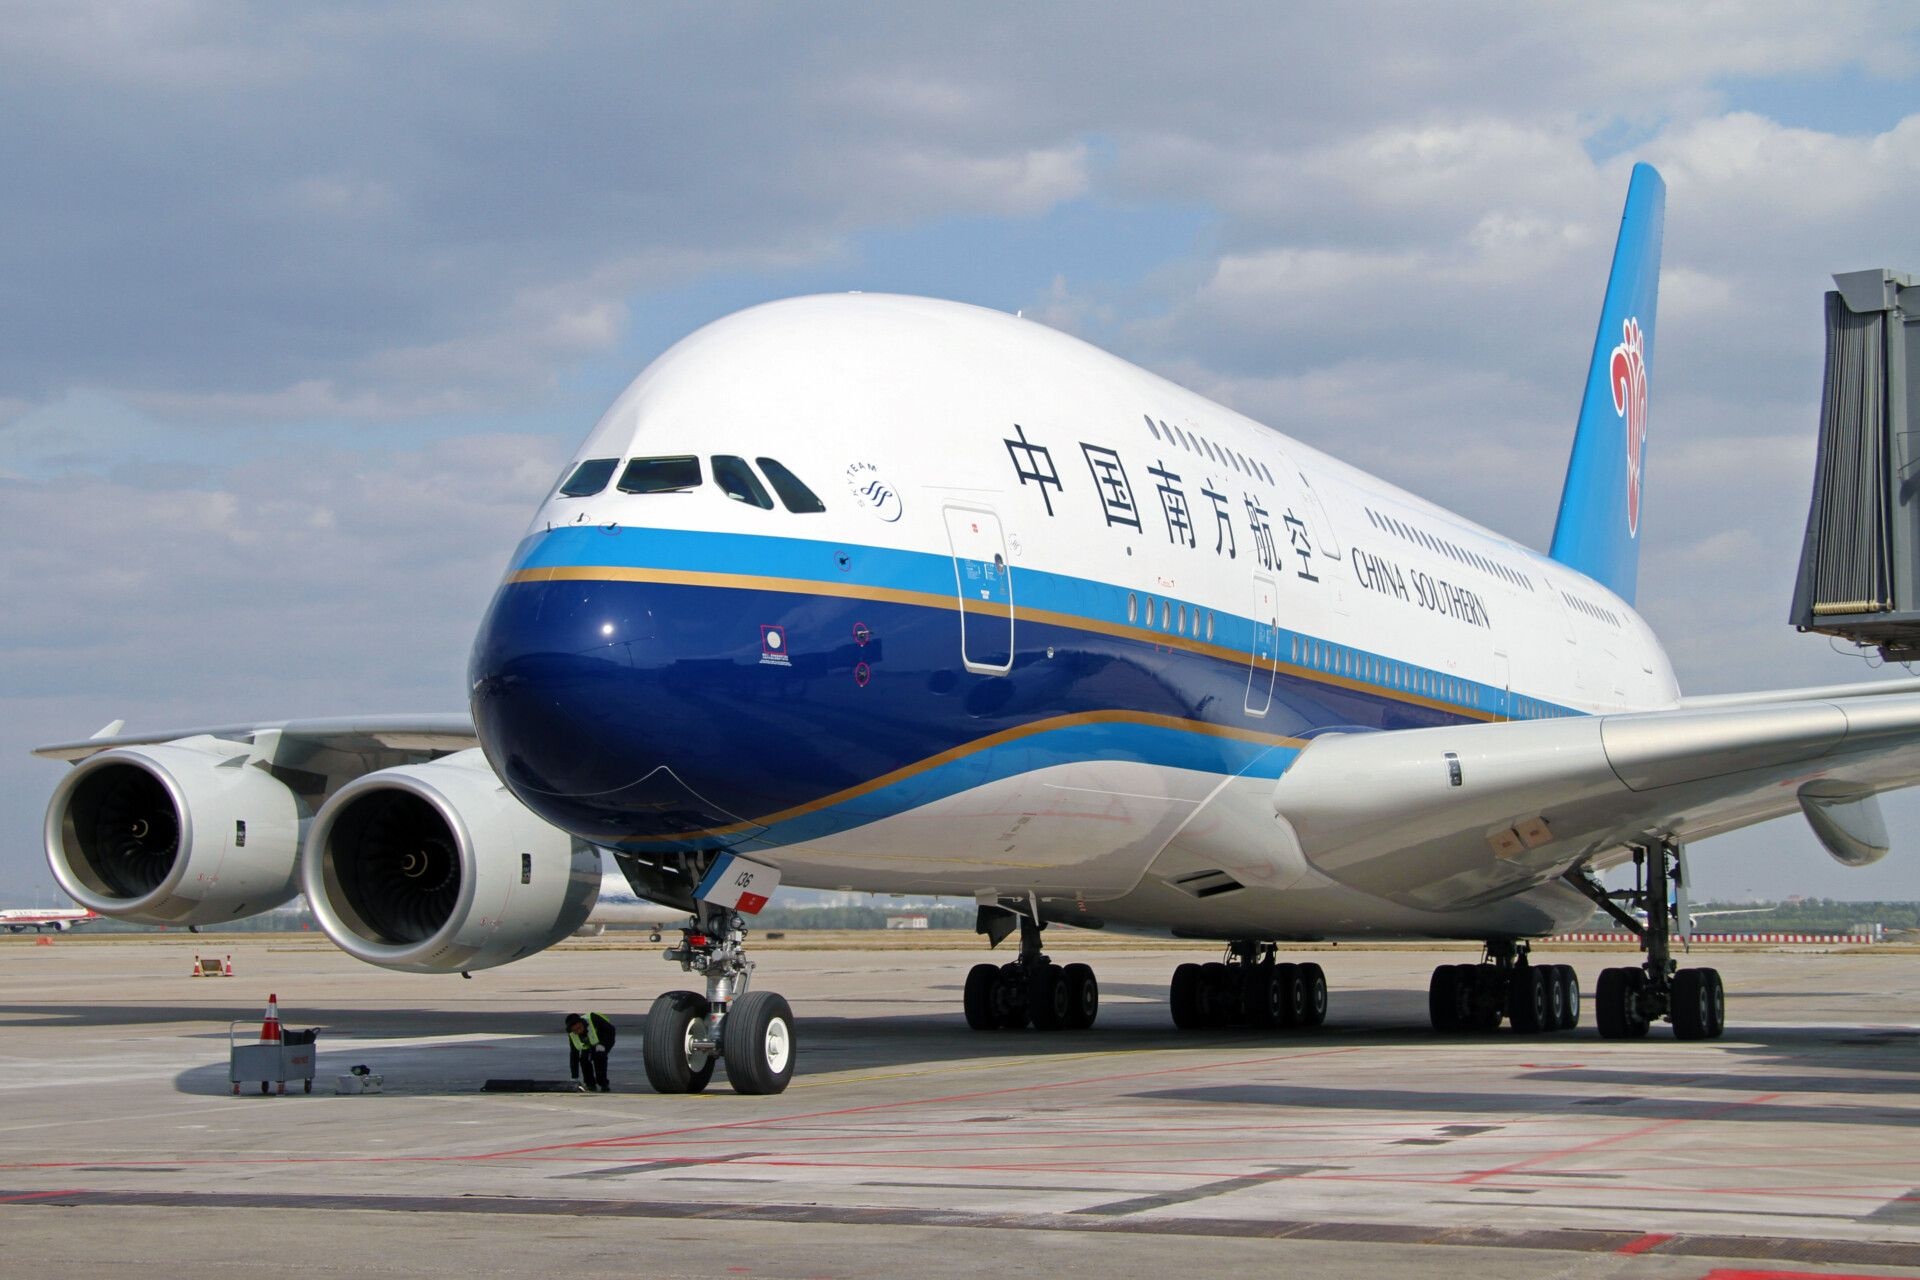 China Southern Airlines, 600 fleet size, 33 years, Story of, 1920x1280 HD Desktop